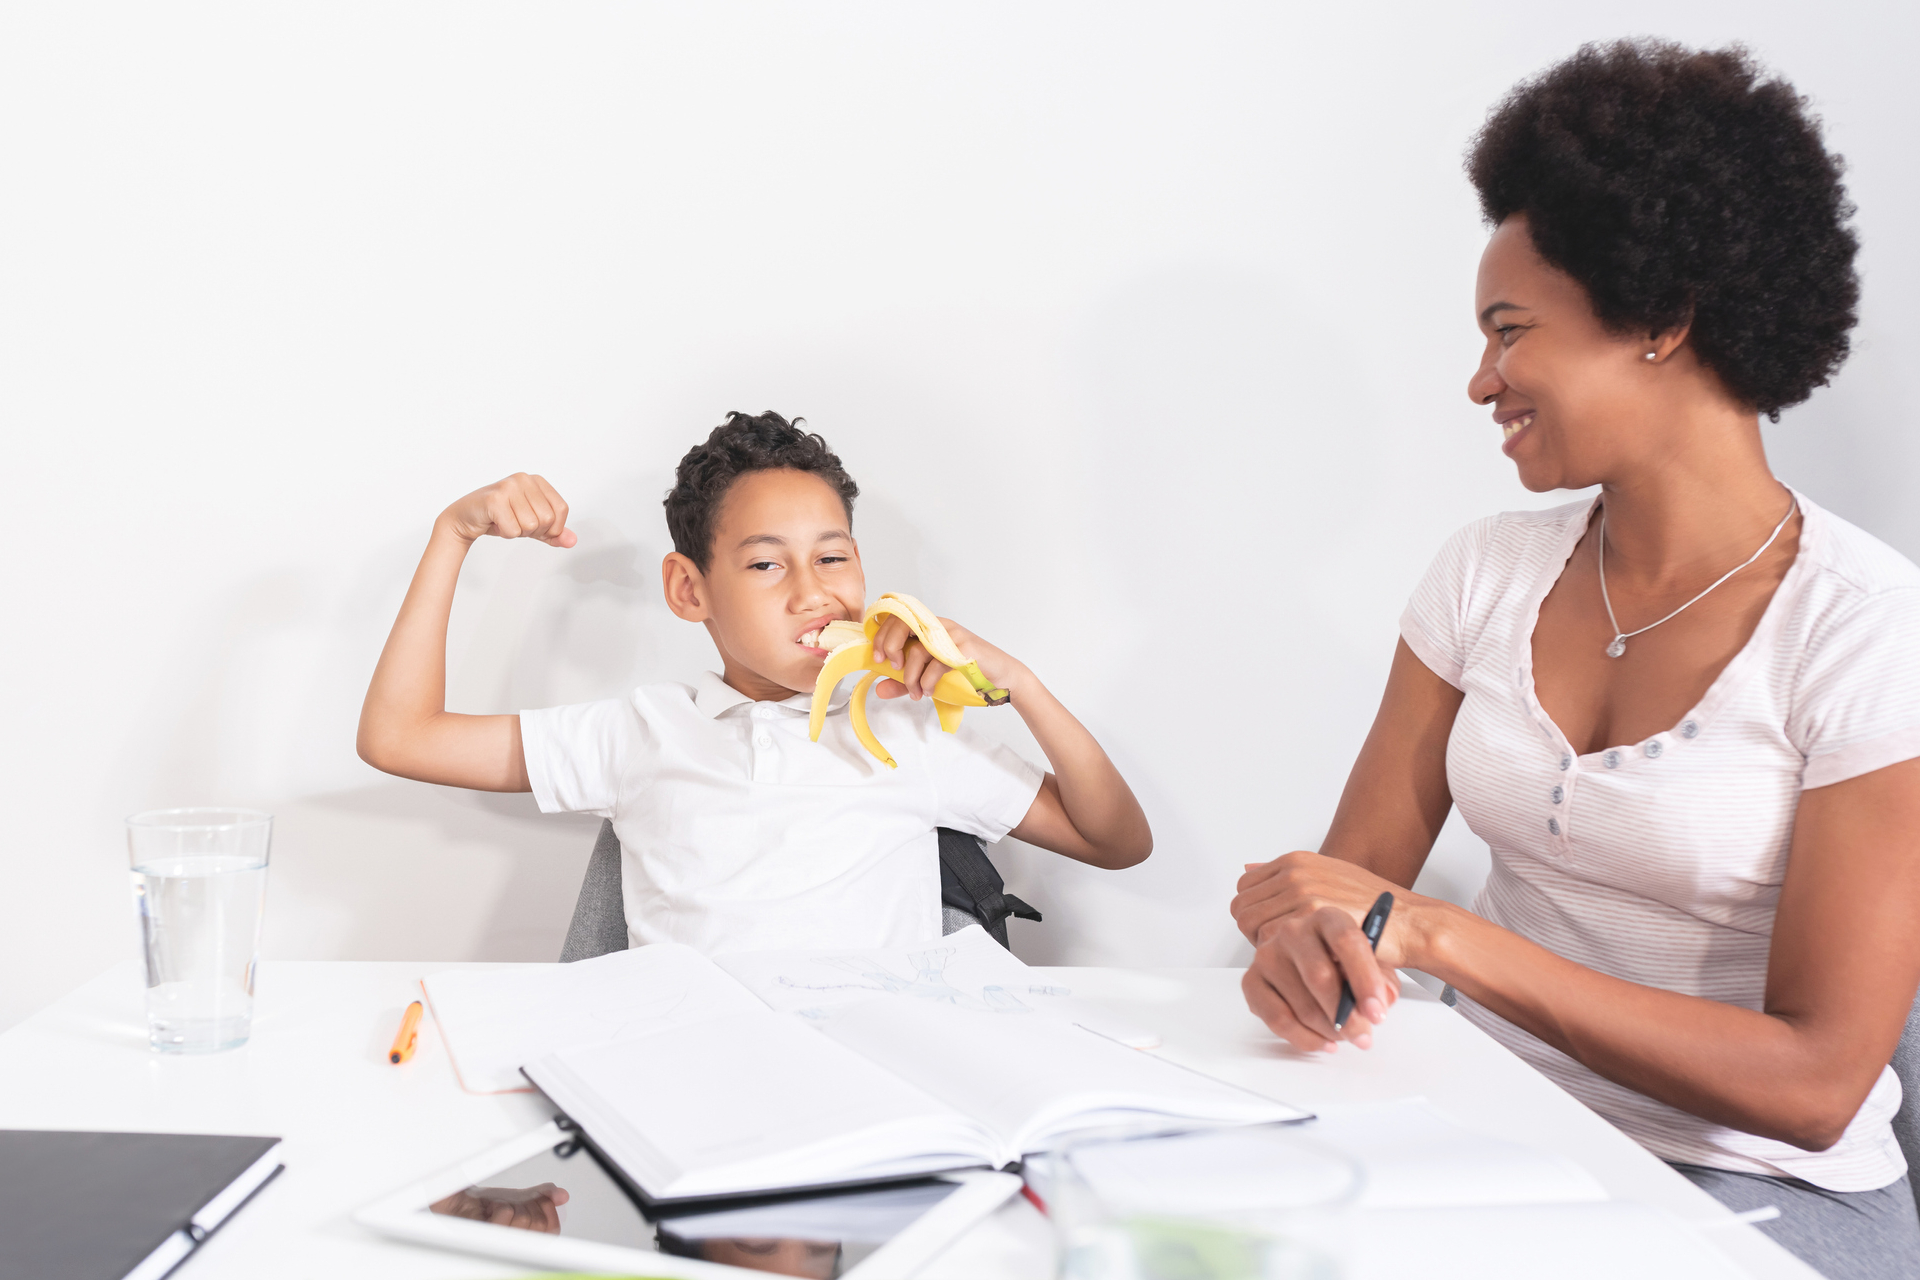 Tween appetite: Boy about age 12 eating banana while doing homework while mom looks on laughing. BIPOC family.